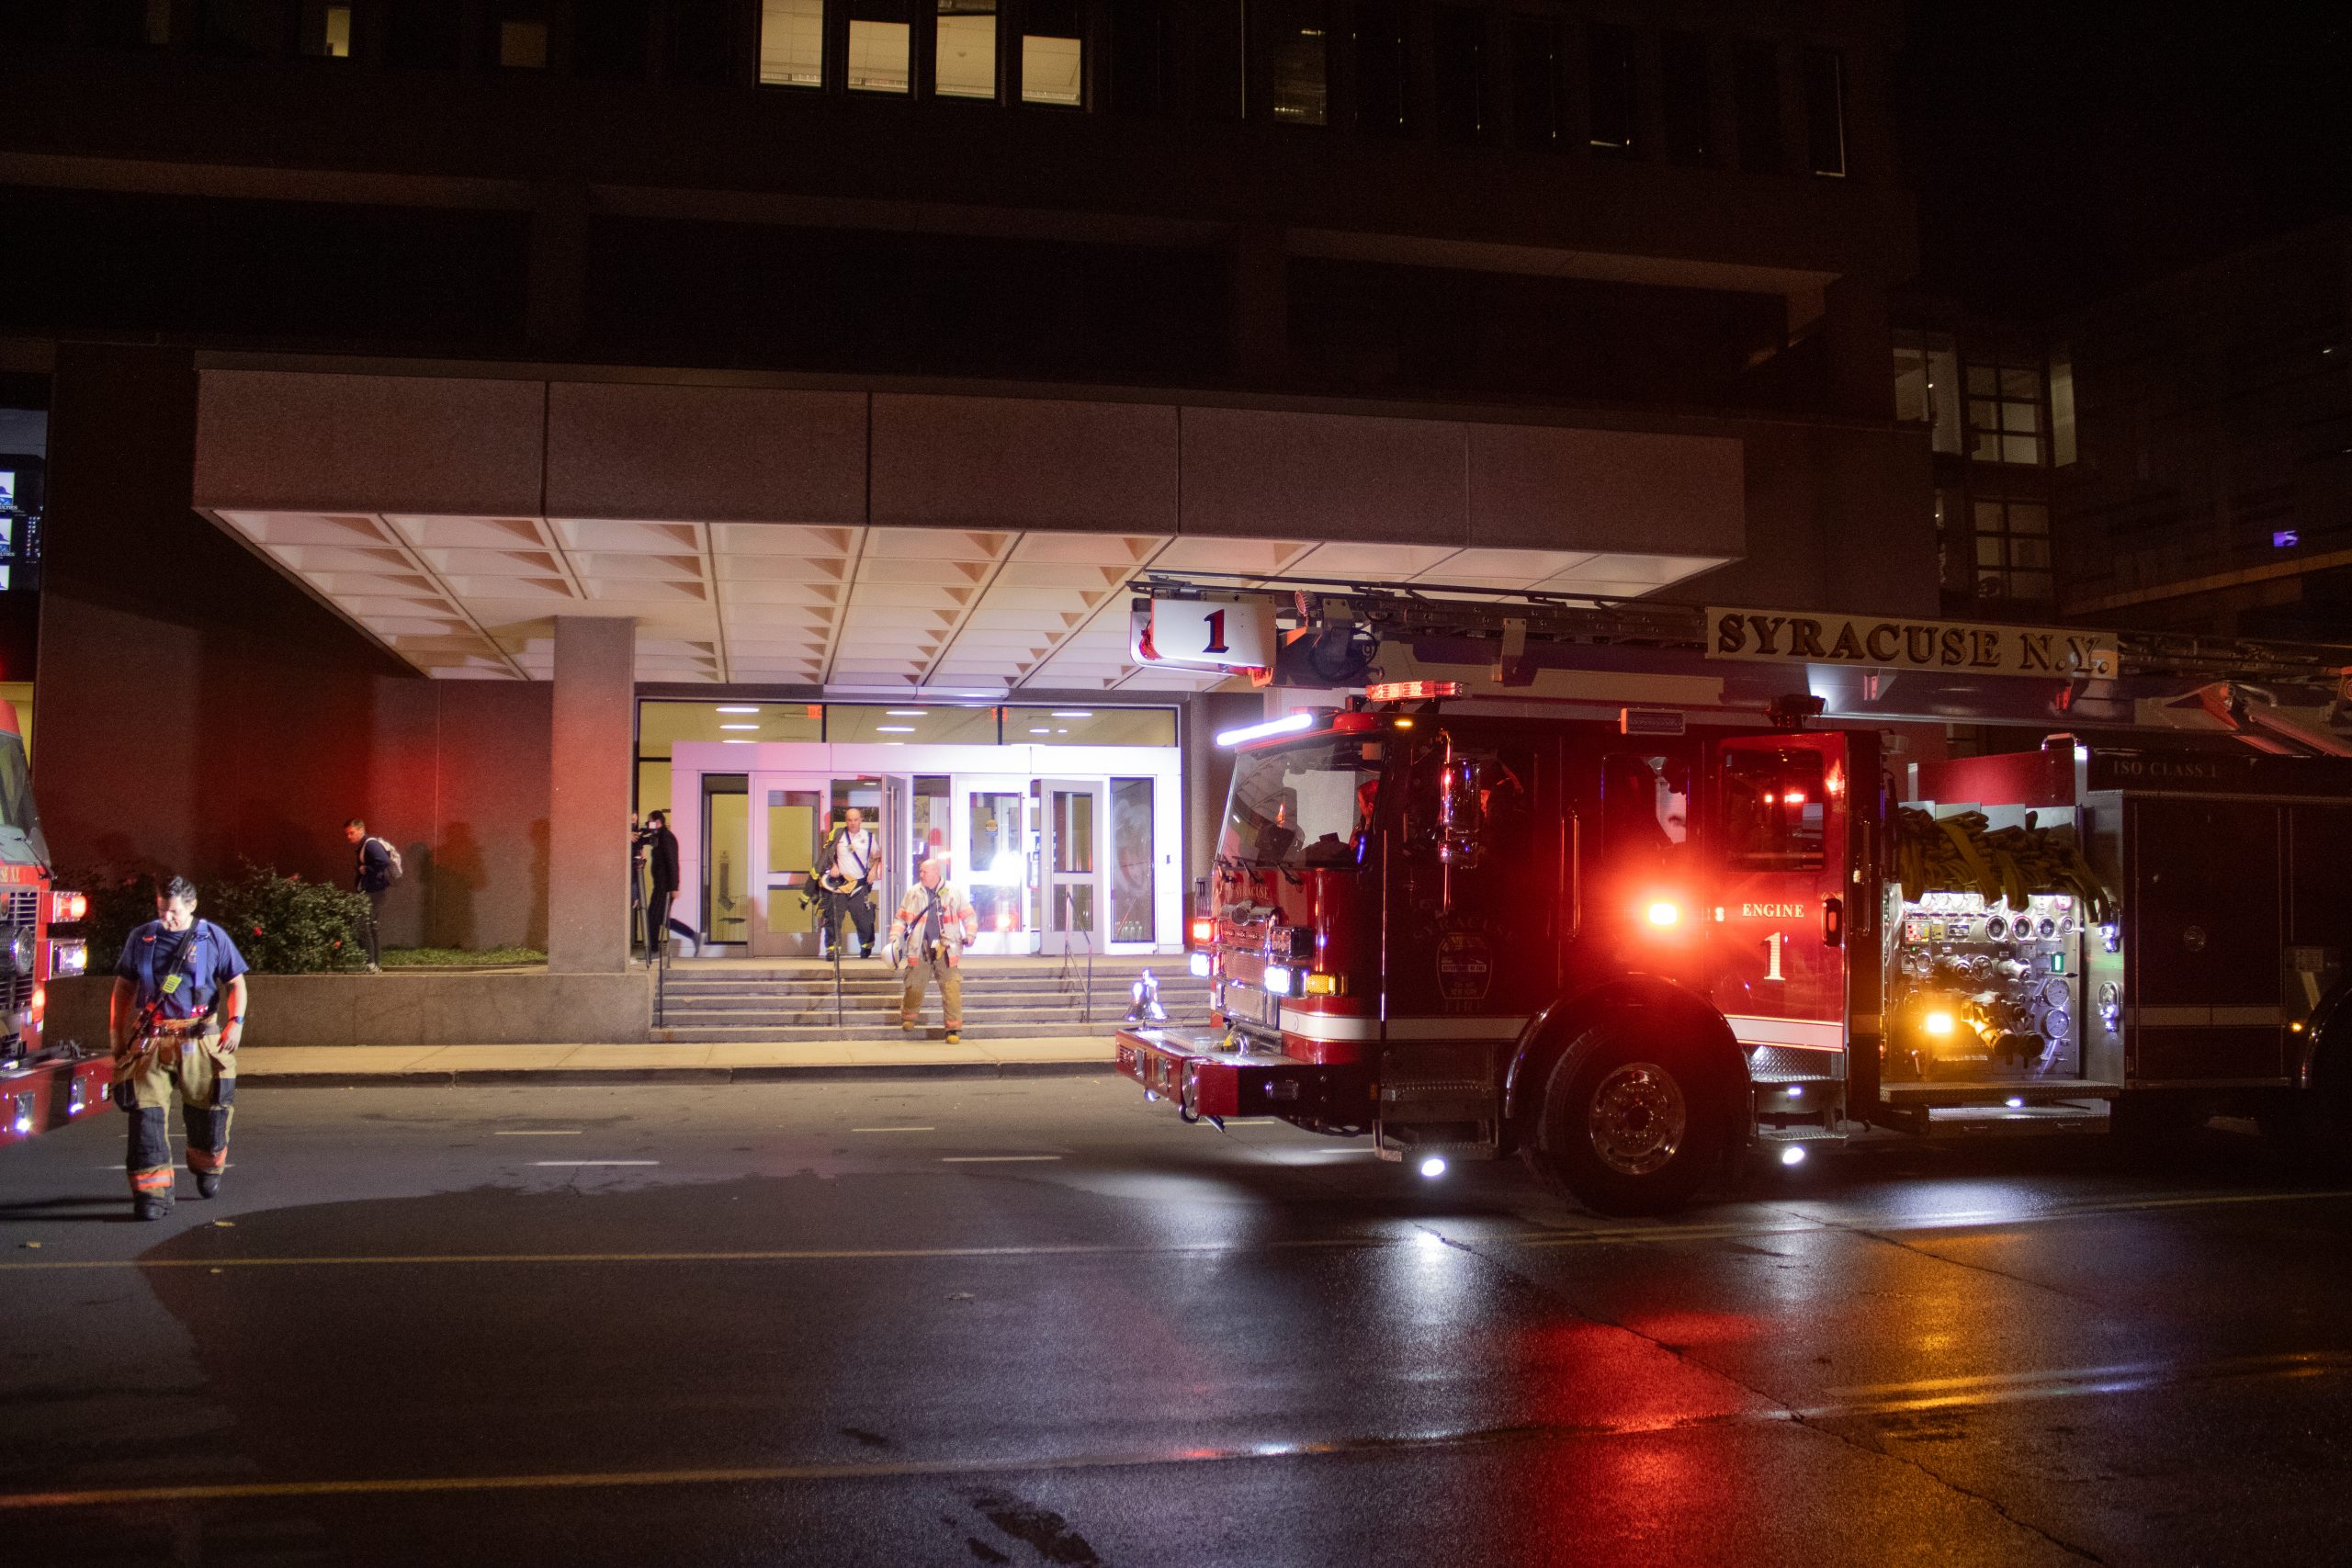 Multiple fire trucks and emergency vehicles reached the Newhouse School building complex on Waverly Avenue around 8 p.m.